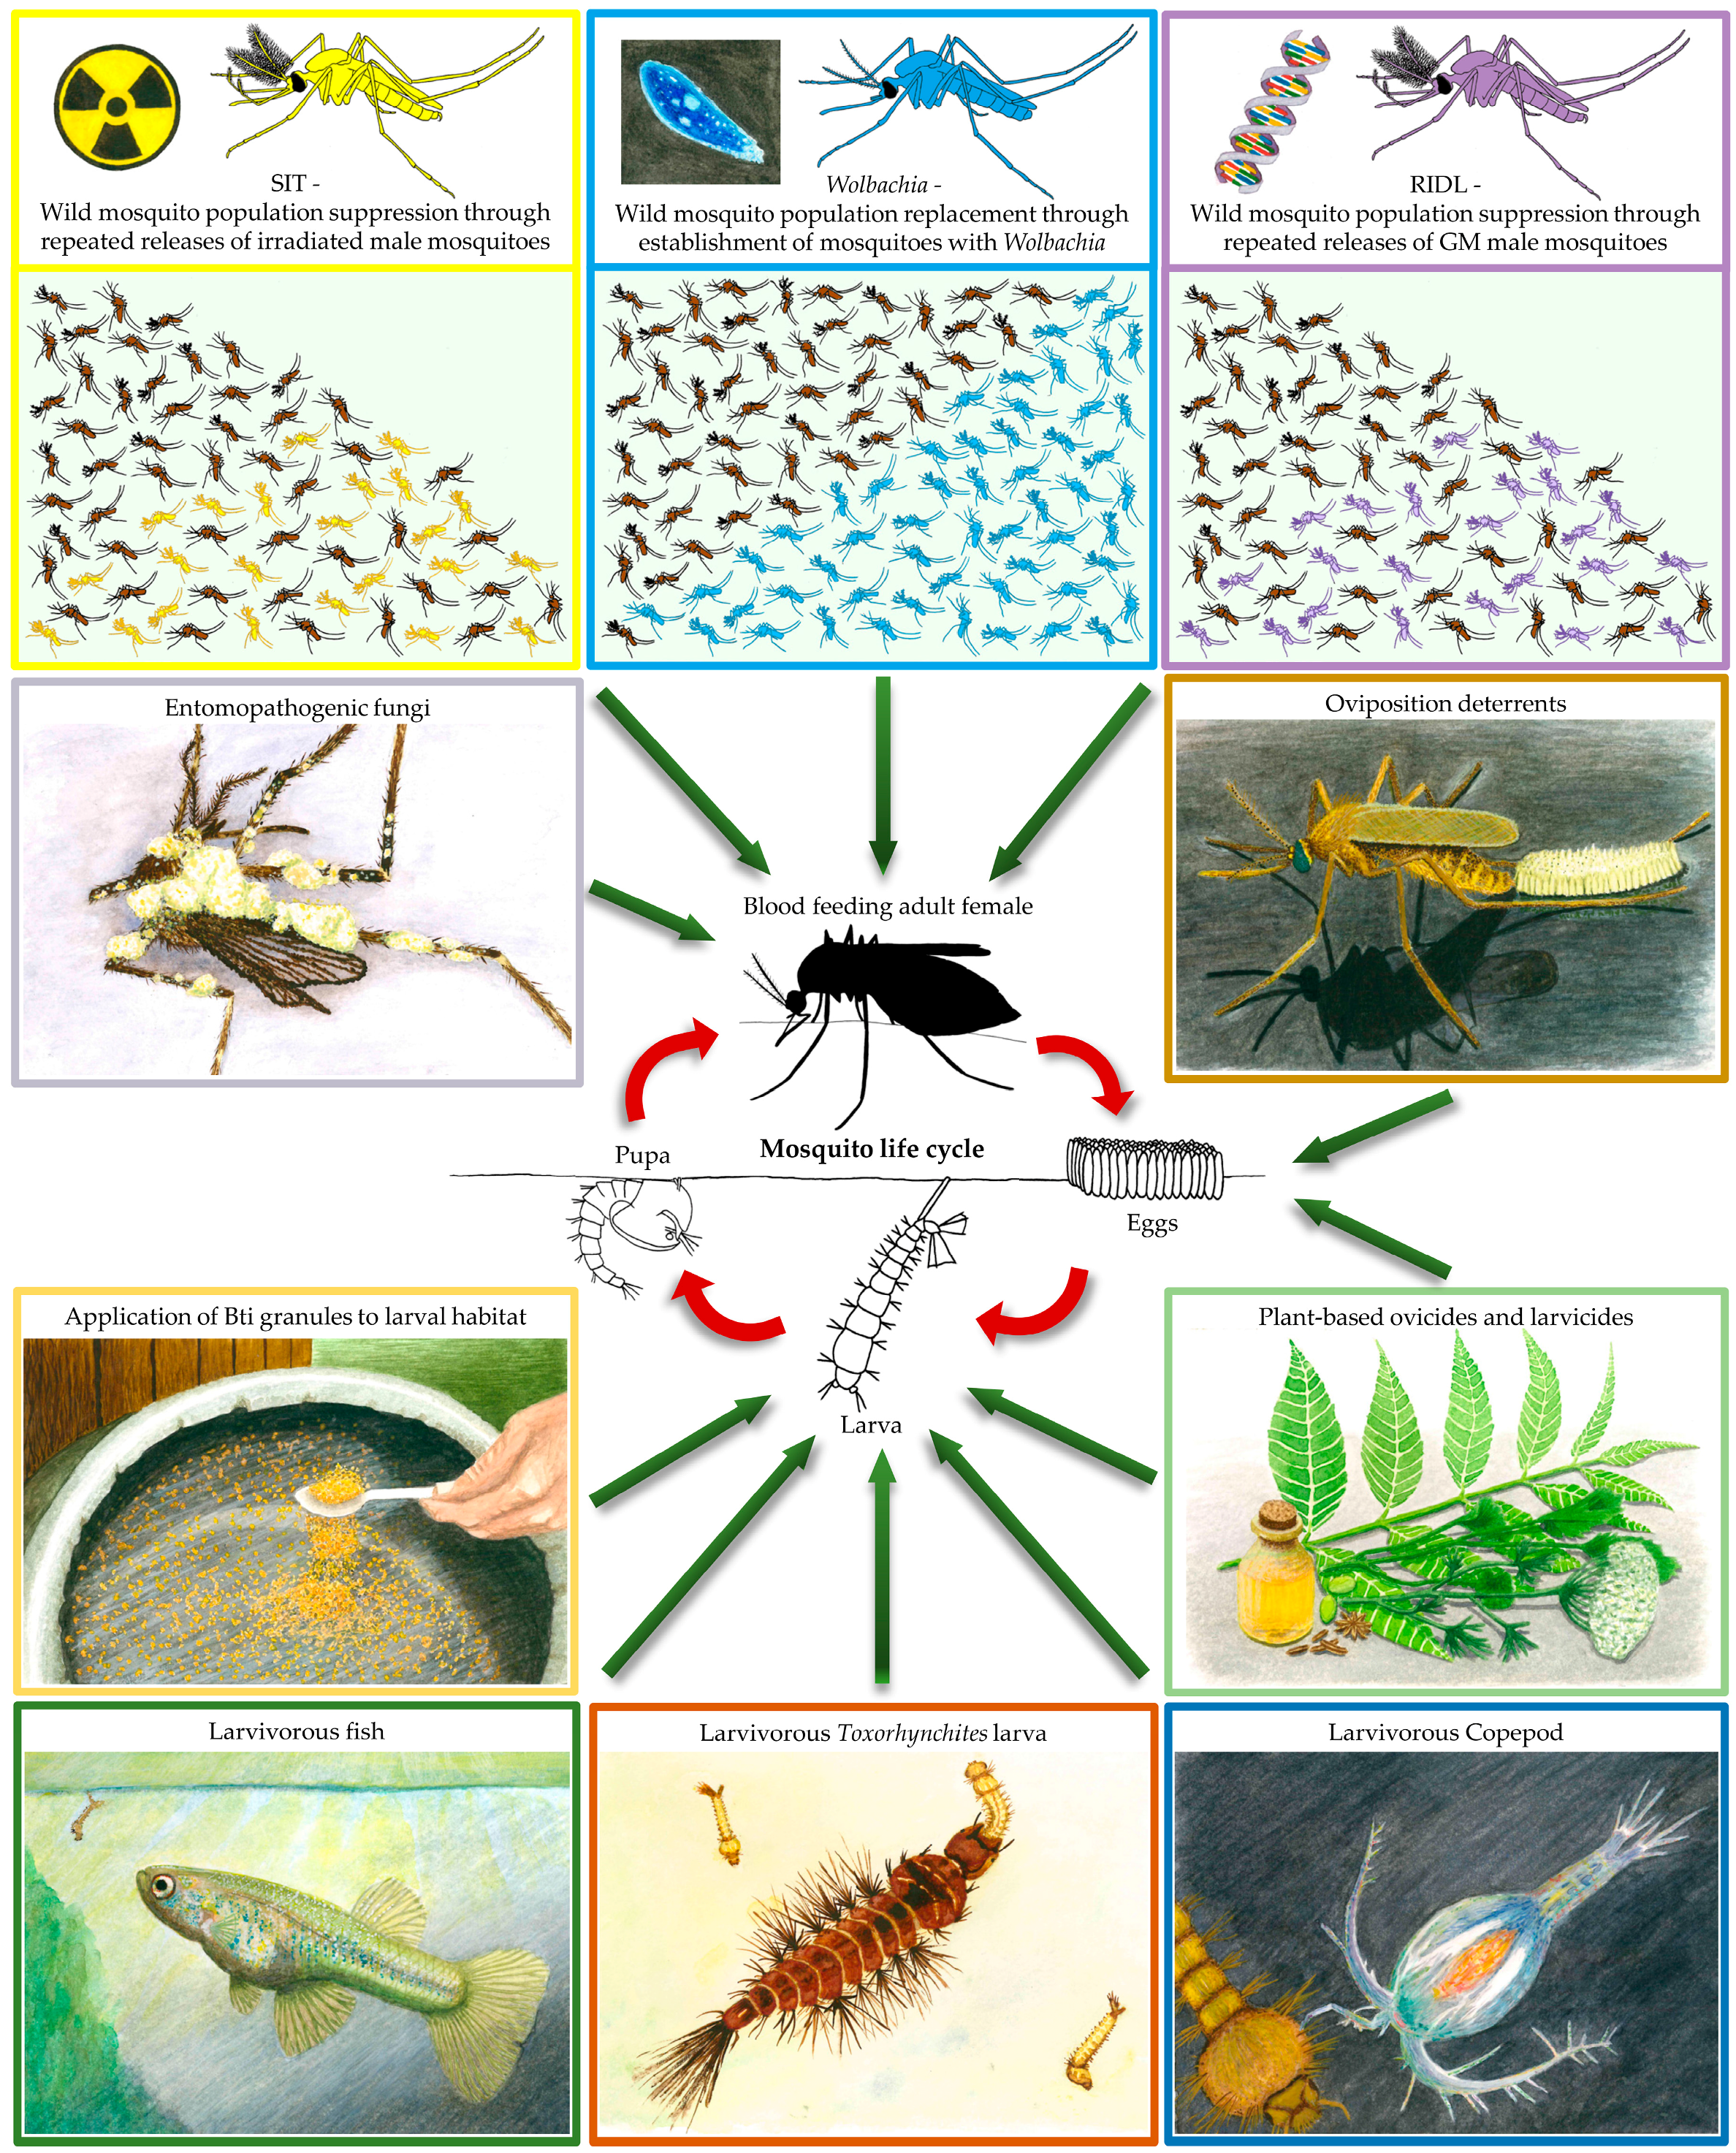 Insects | Free Full-Text | Biological Control of Mosquito Vectors: Past,  Present, and Future